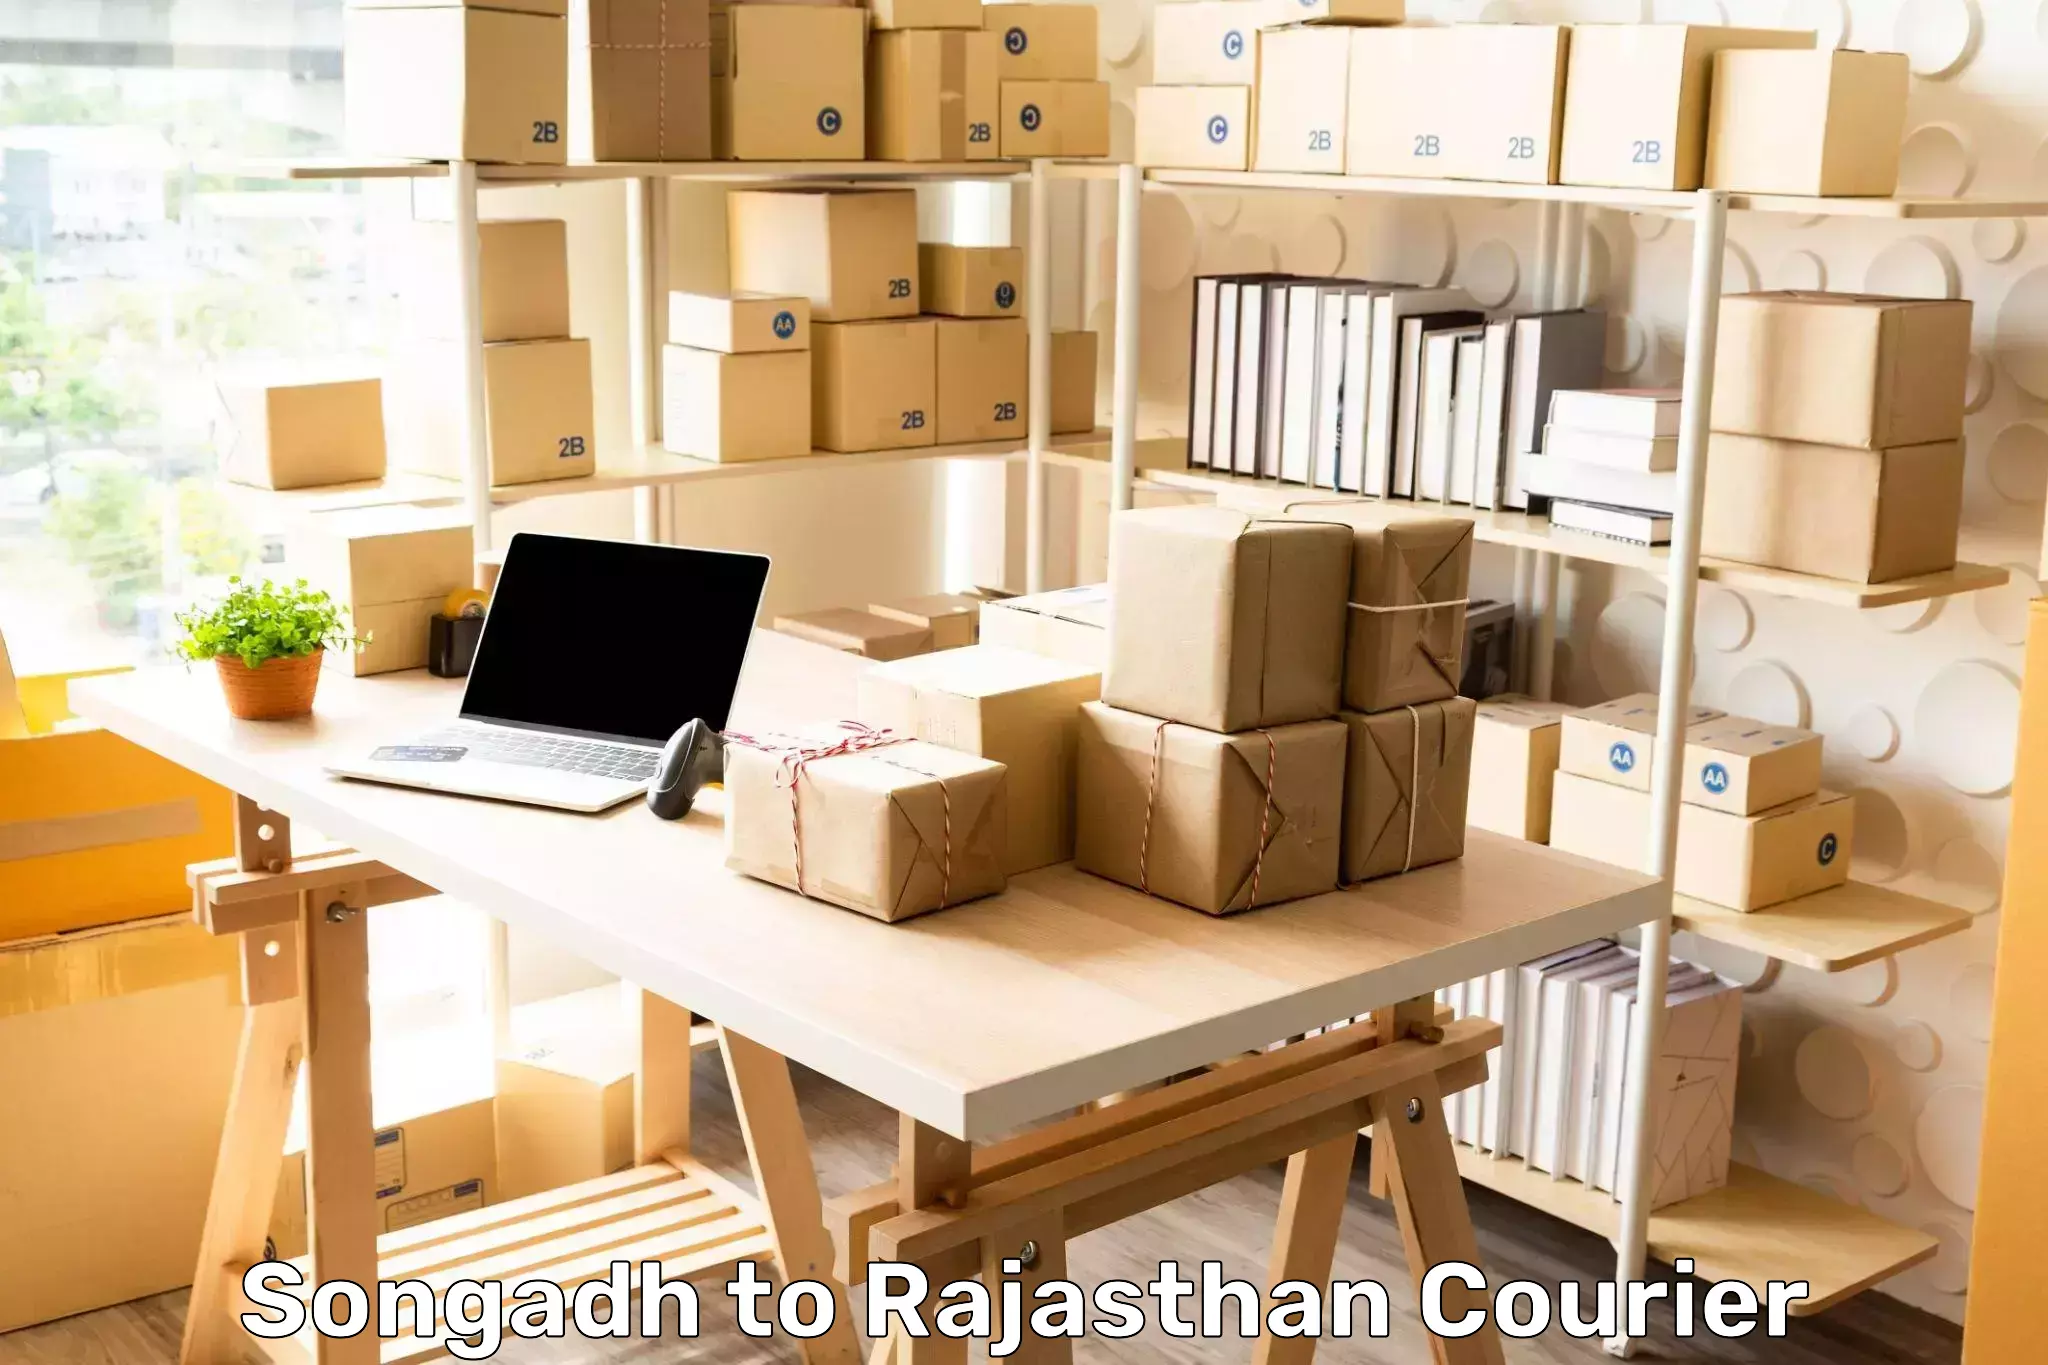 Parcel service for businesses in Songadh to Alwar